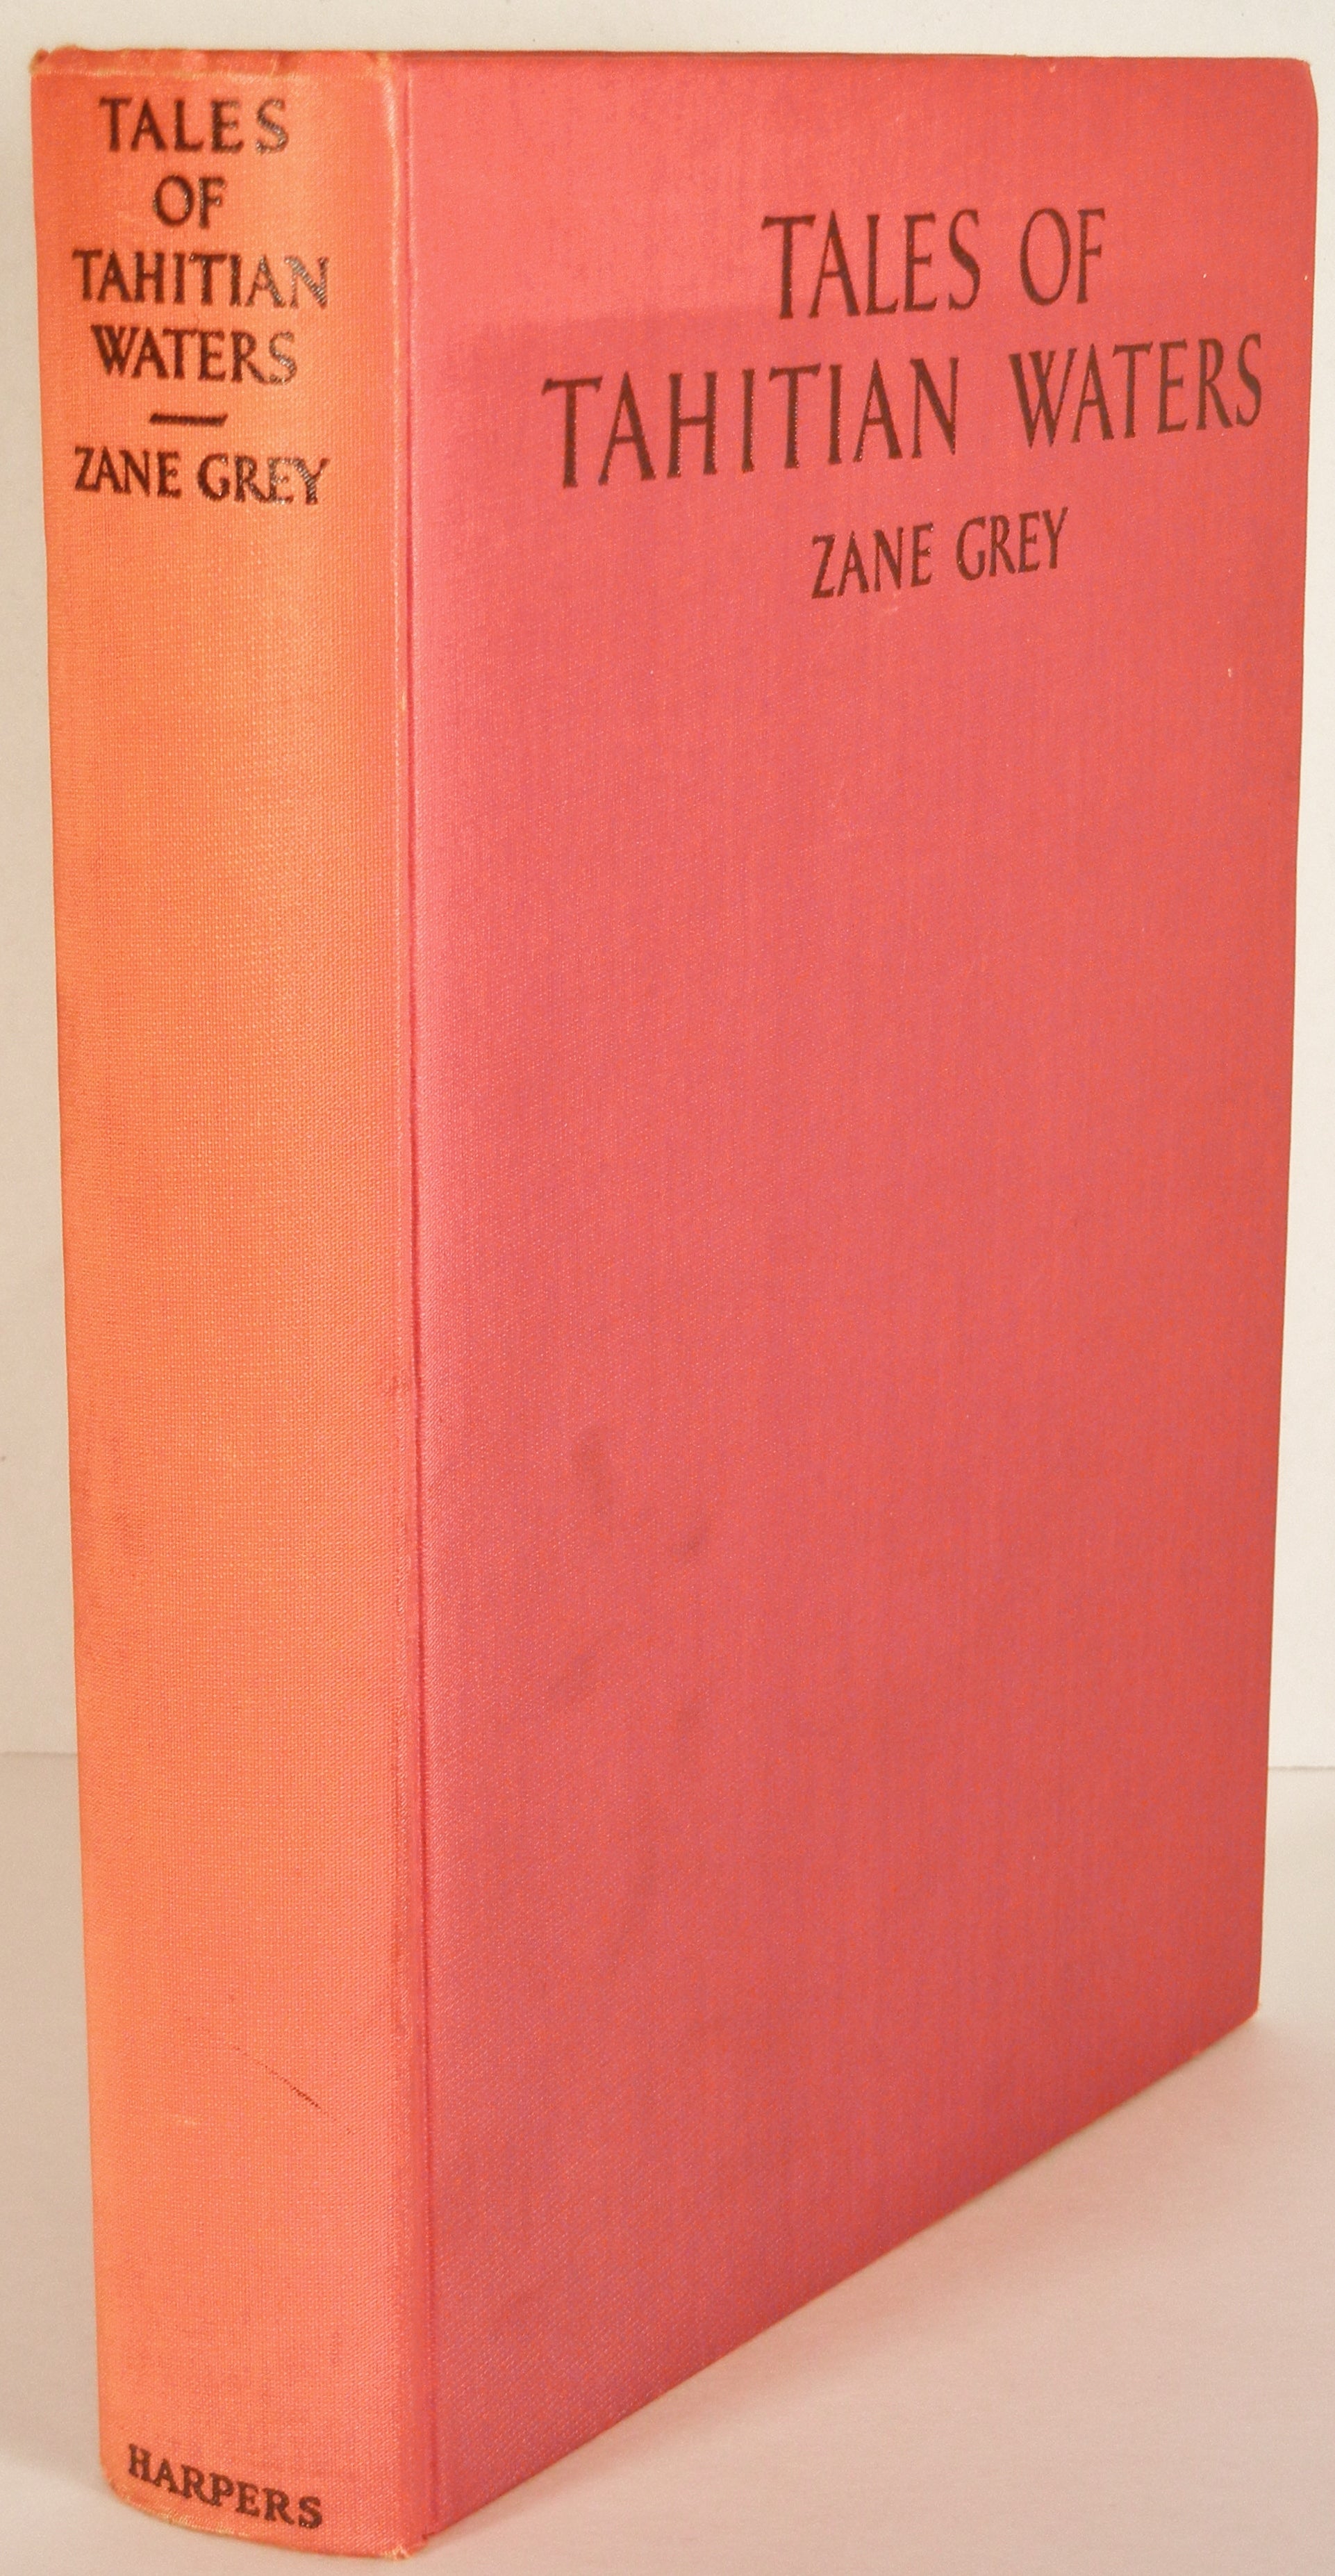 First Edition Zane Grey, "Tales of Tahitian Waters" 1931